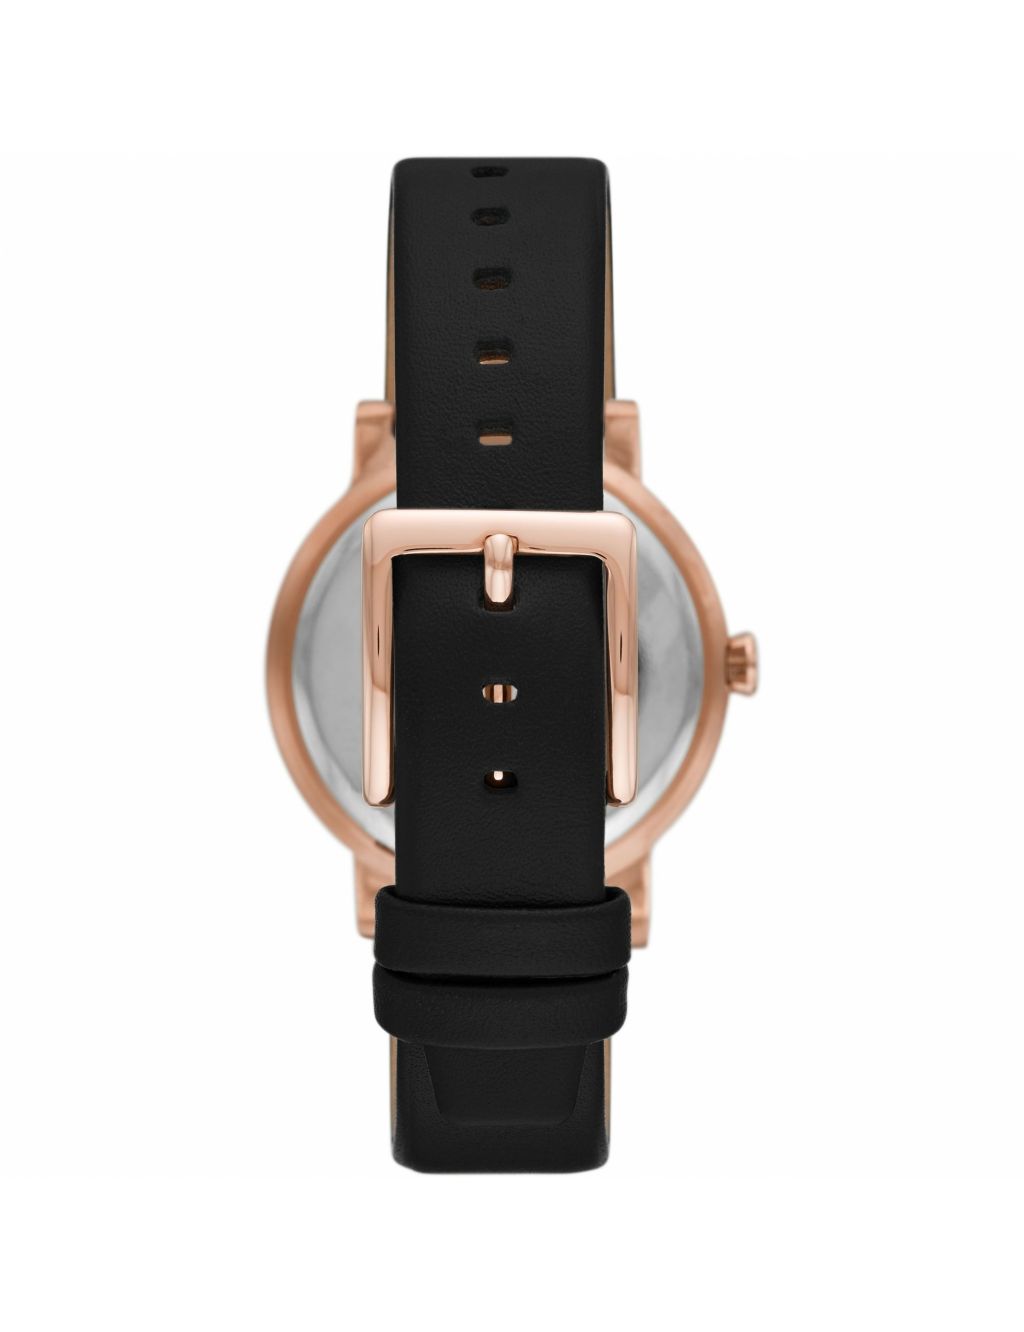 DKNY 7th Avenue Black Leather Watch image 2